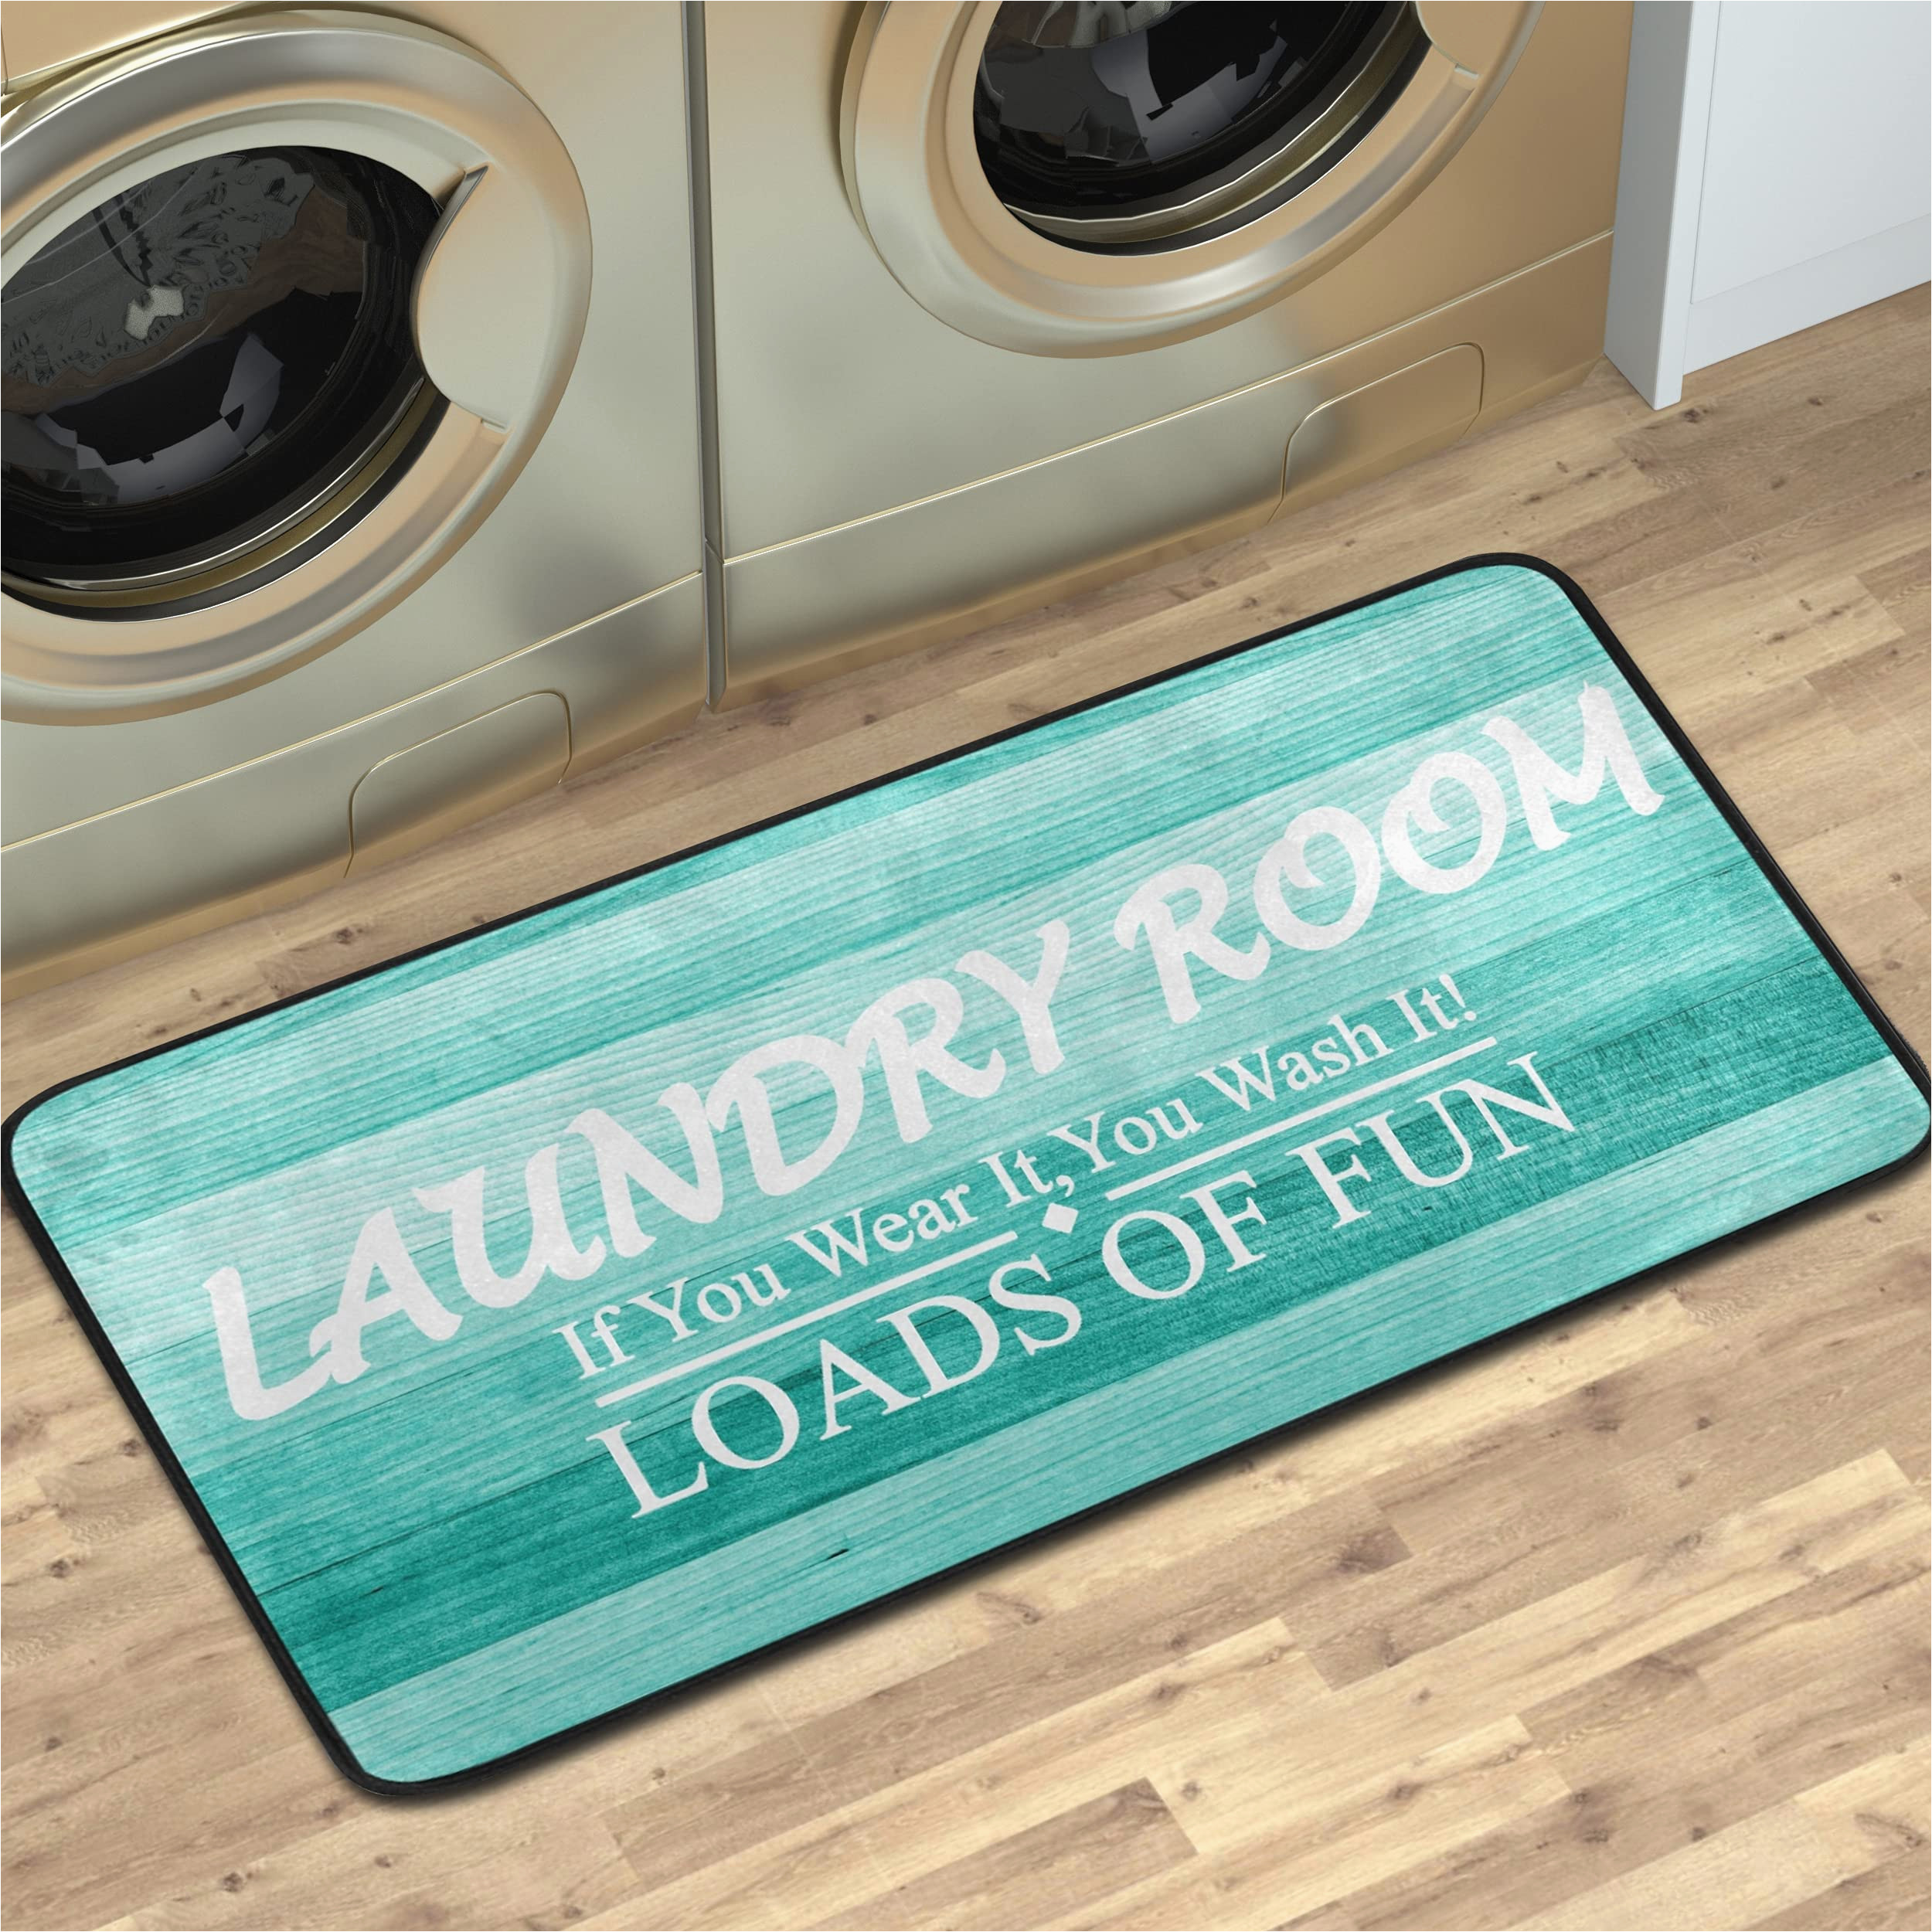 Washing area Rug at Laundromat Teal Turquoise Laundry Room Rug Washing Machine Room Runner Mats Non Slip Farmhouse Carpet Laundry Decor area Rugs 39 X 20 Inch